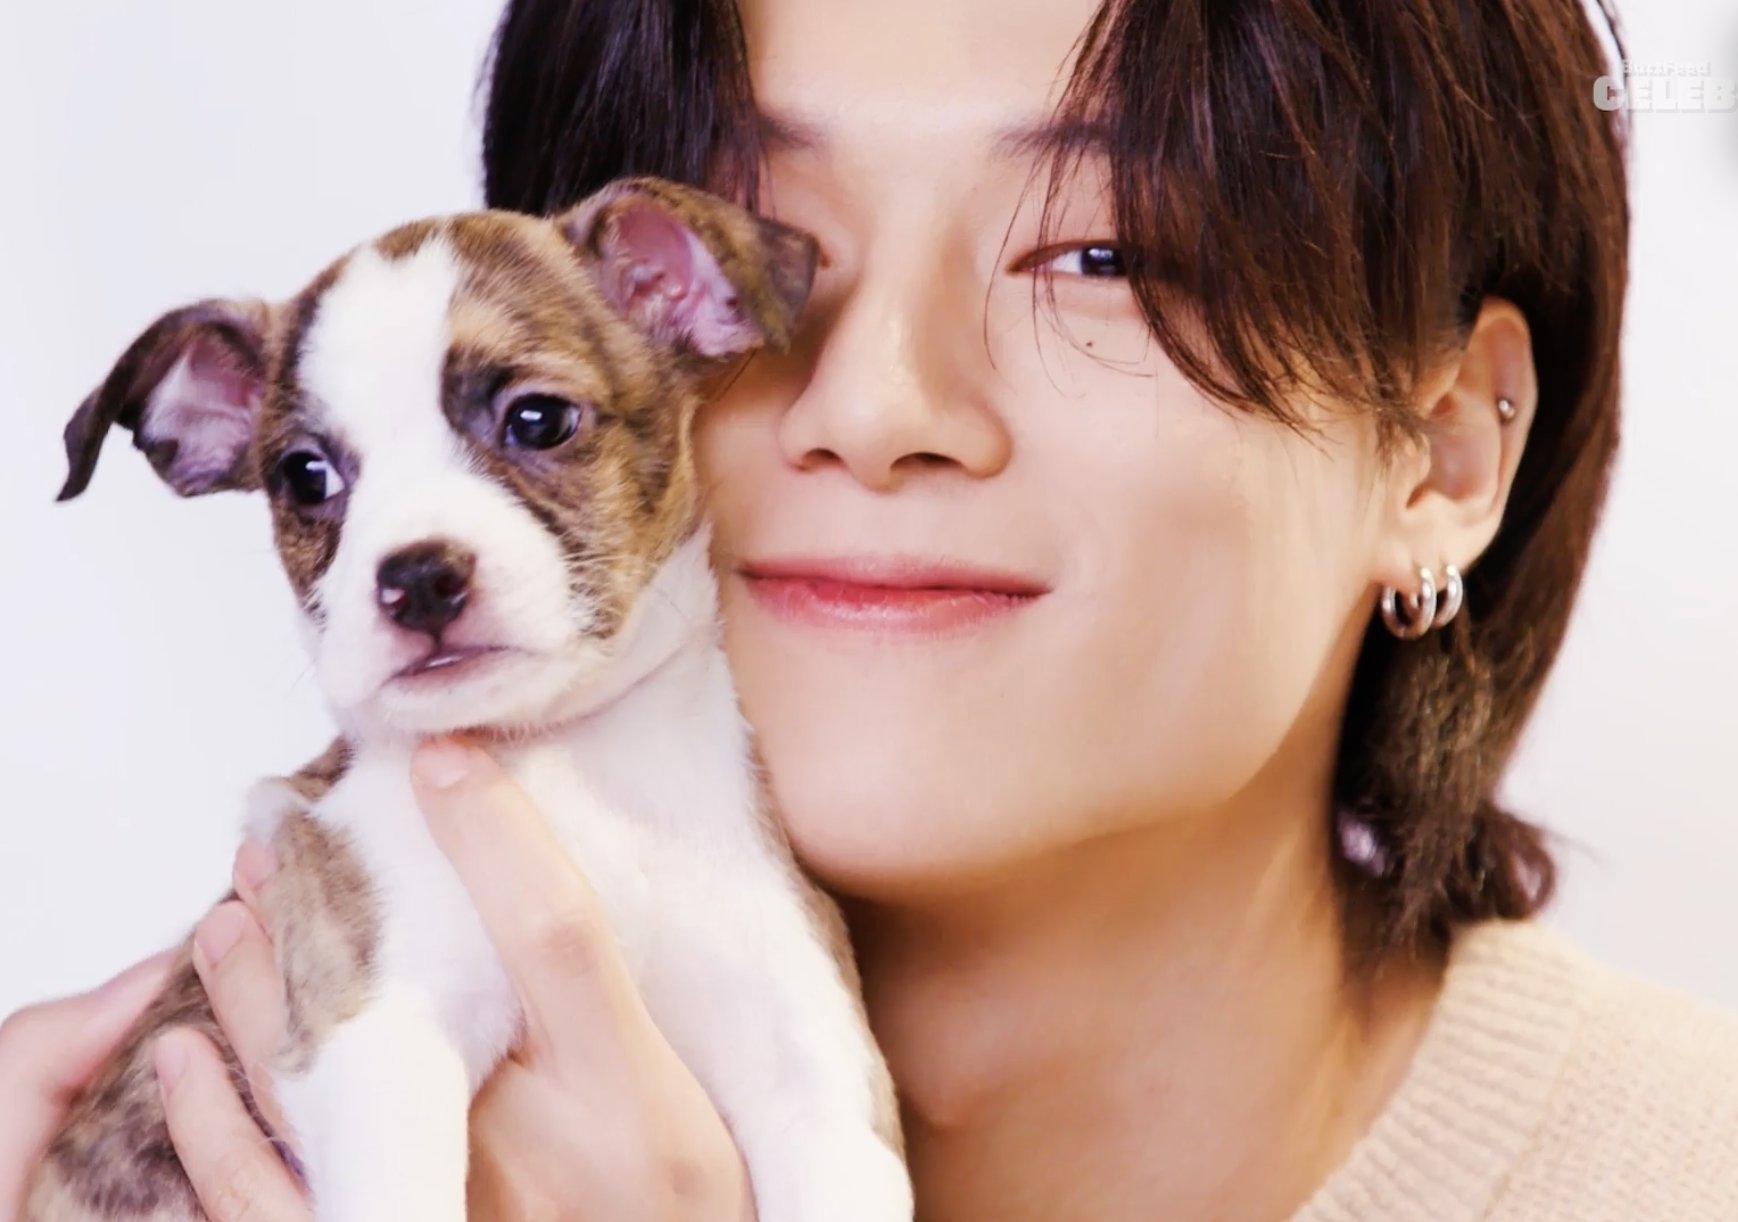 Close-up of a smiling member of Ateez hugging a puppy